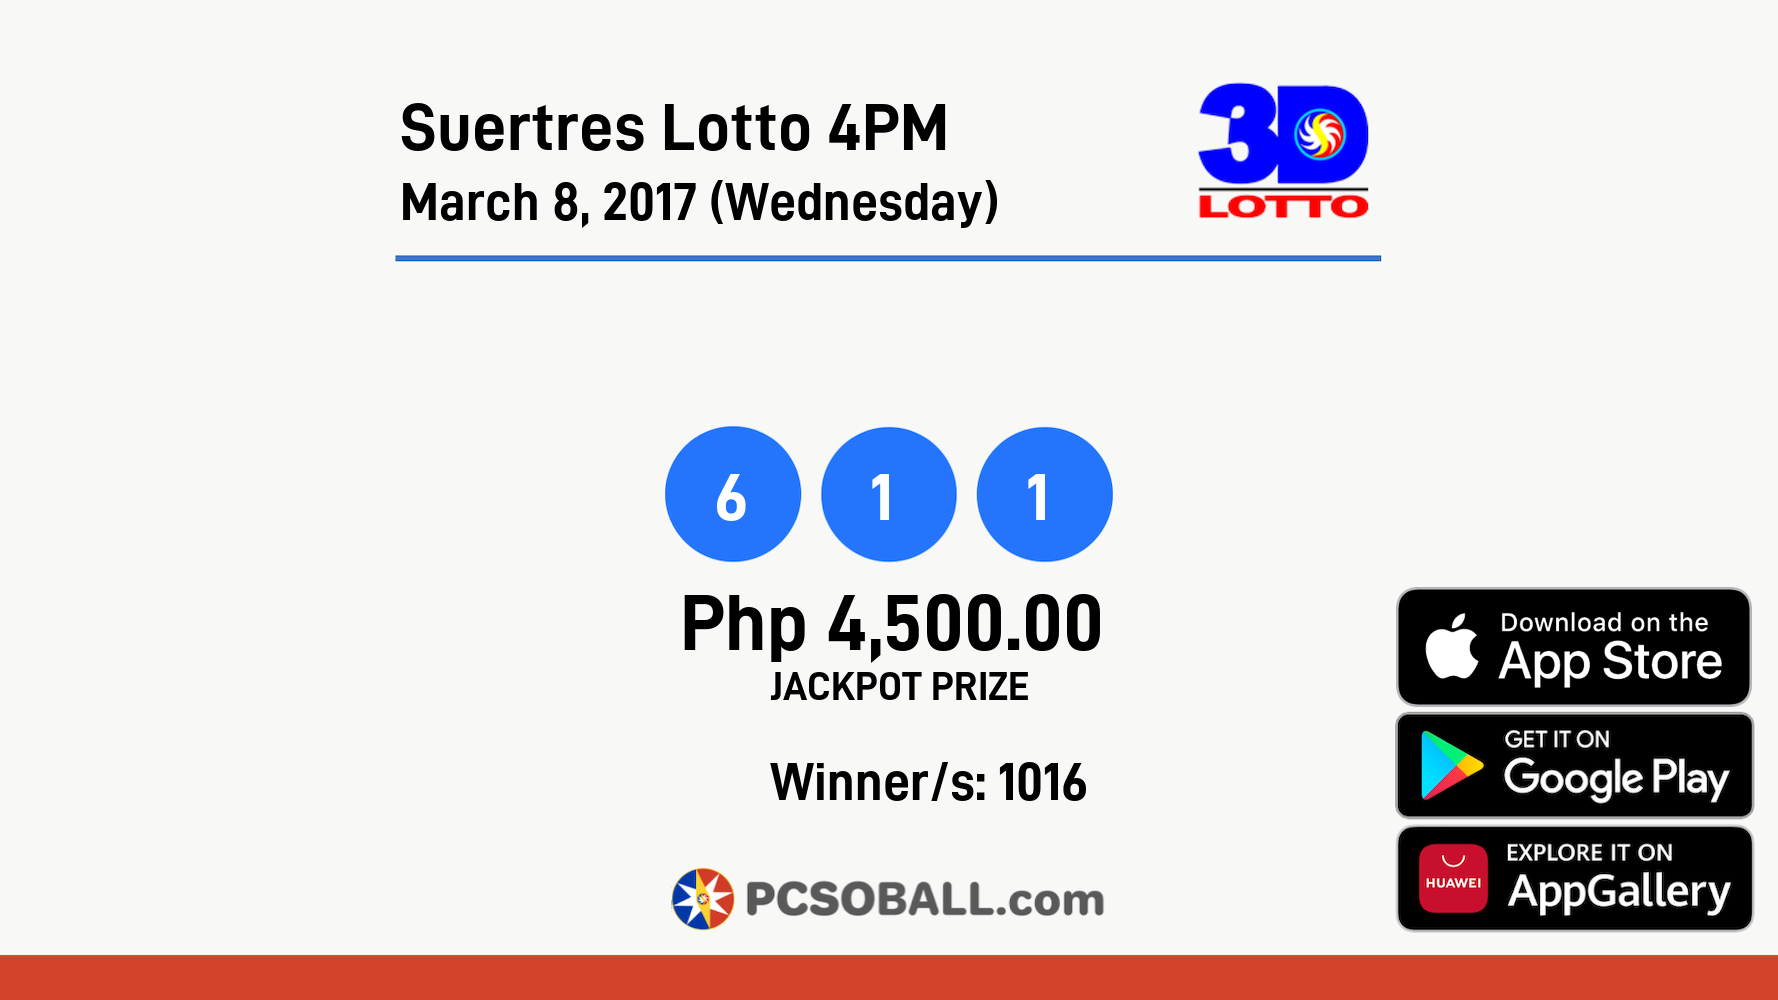 Suertres Lotto 4PM March 8, 2017 (Wednesday) Result